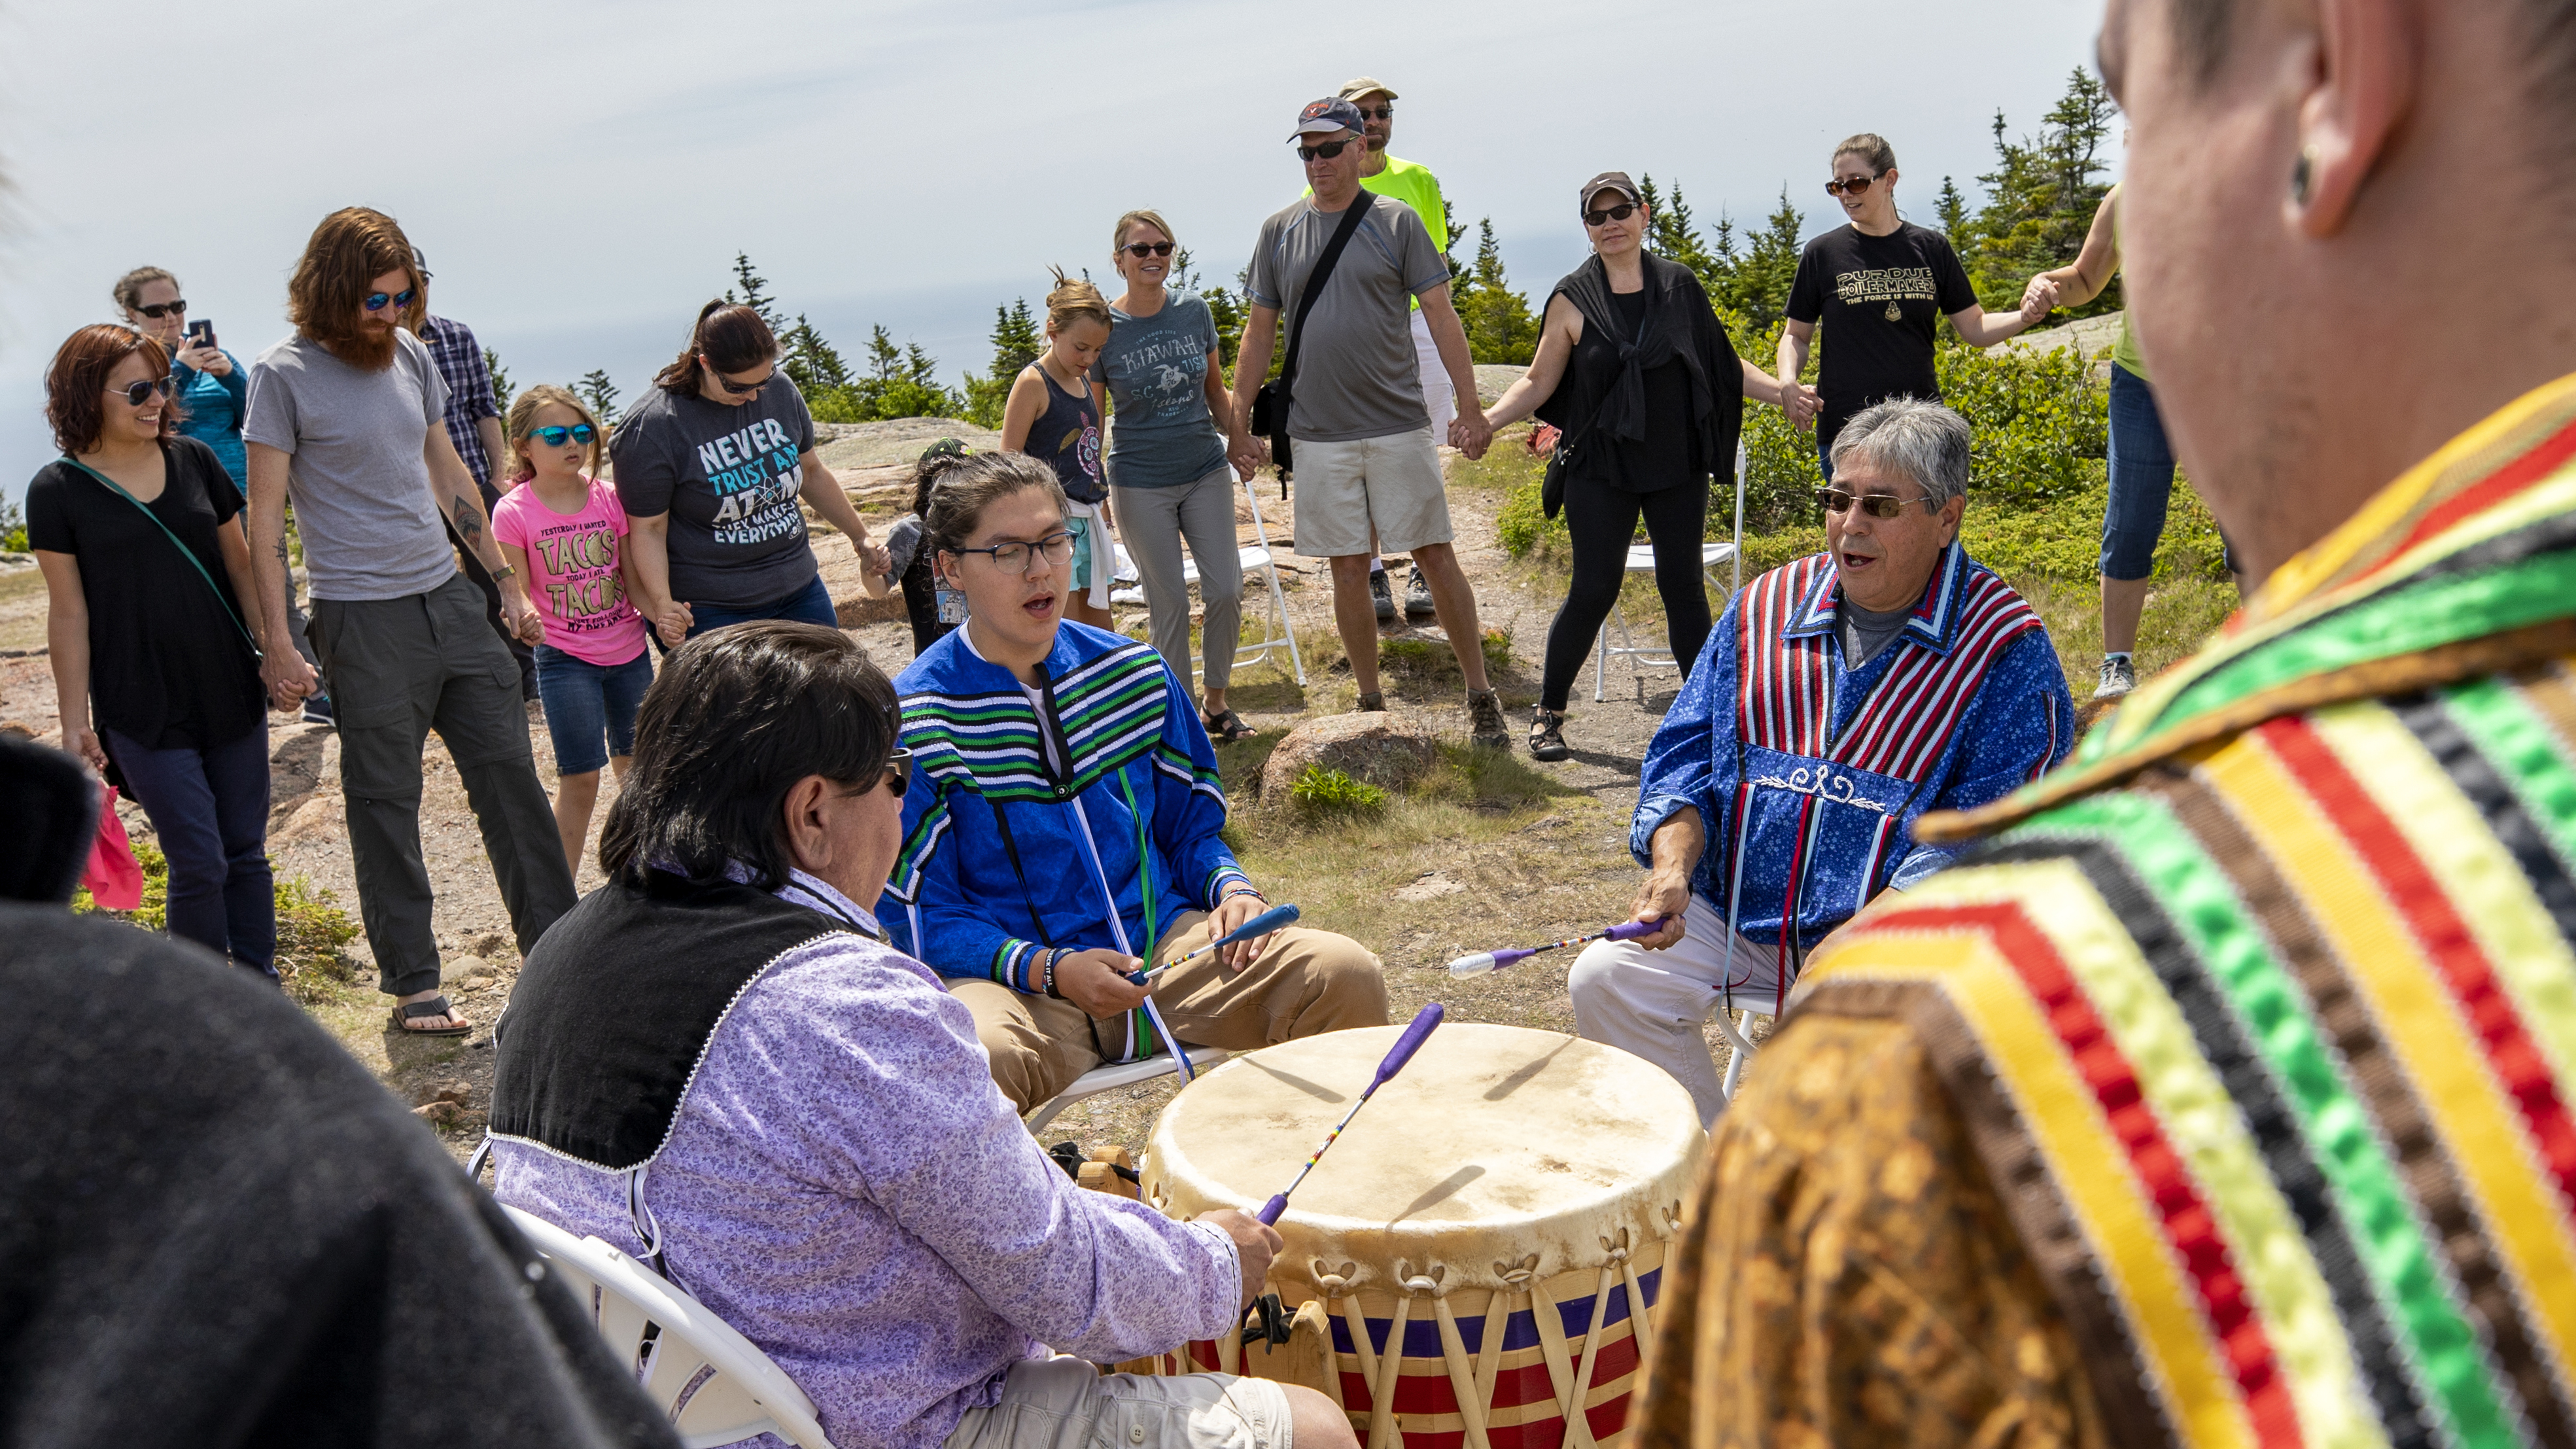 A group of Wabanaki men sit around a drum singing and striking the instrument.